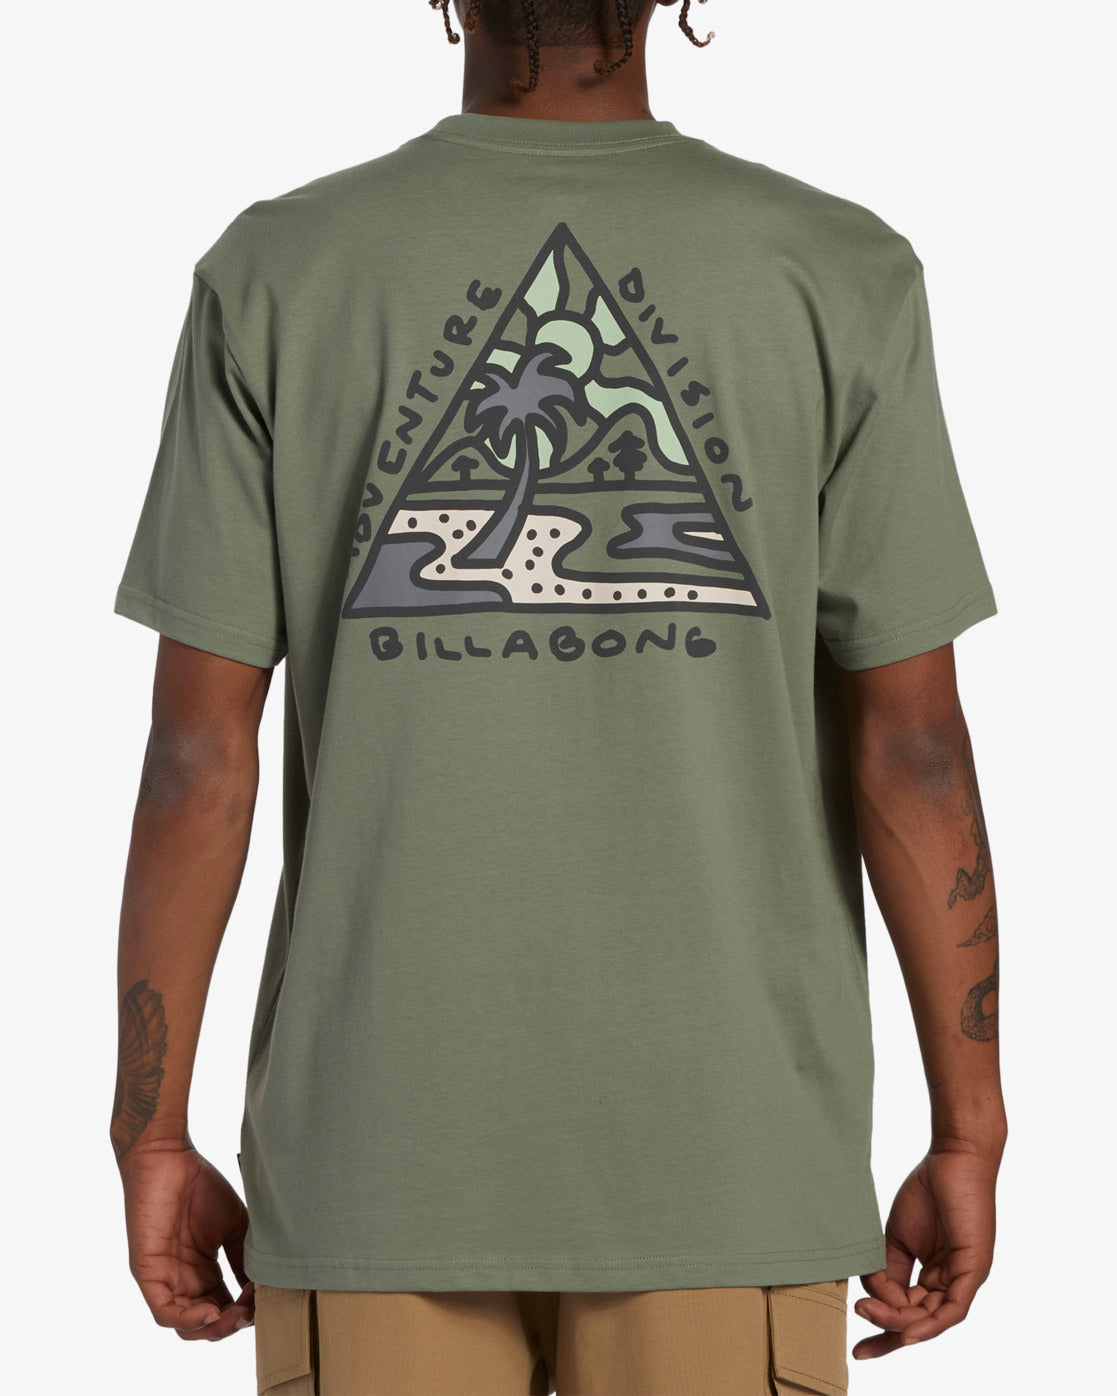 Billabong Shine Men's Tee in sage colour from back